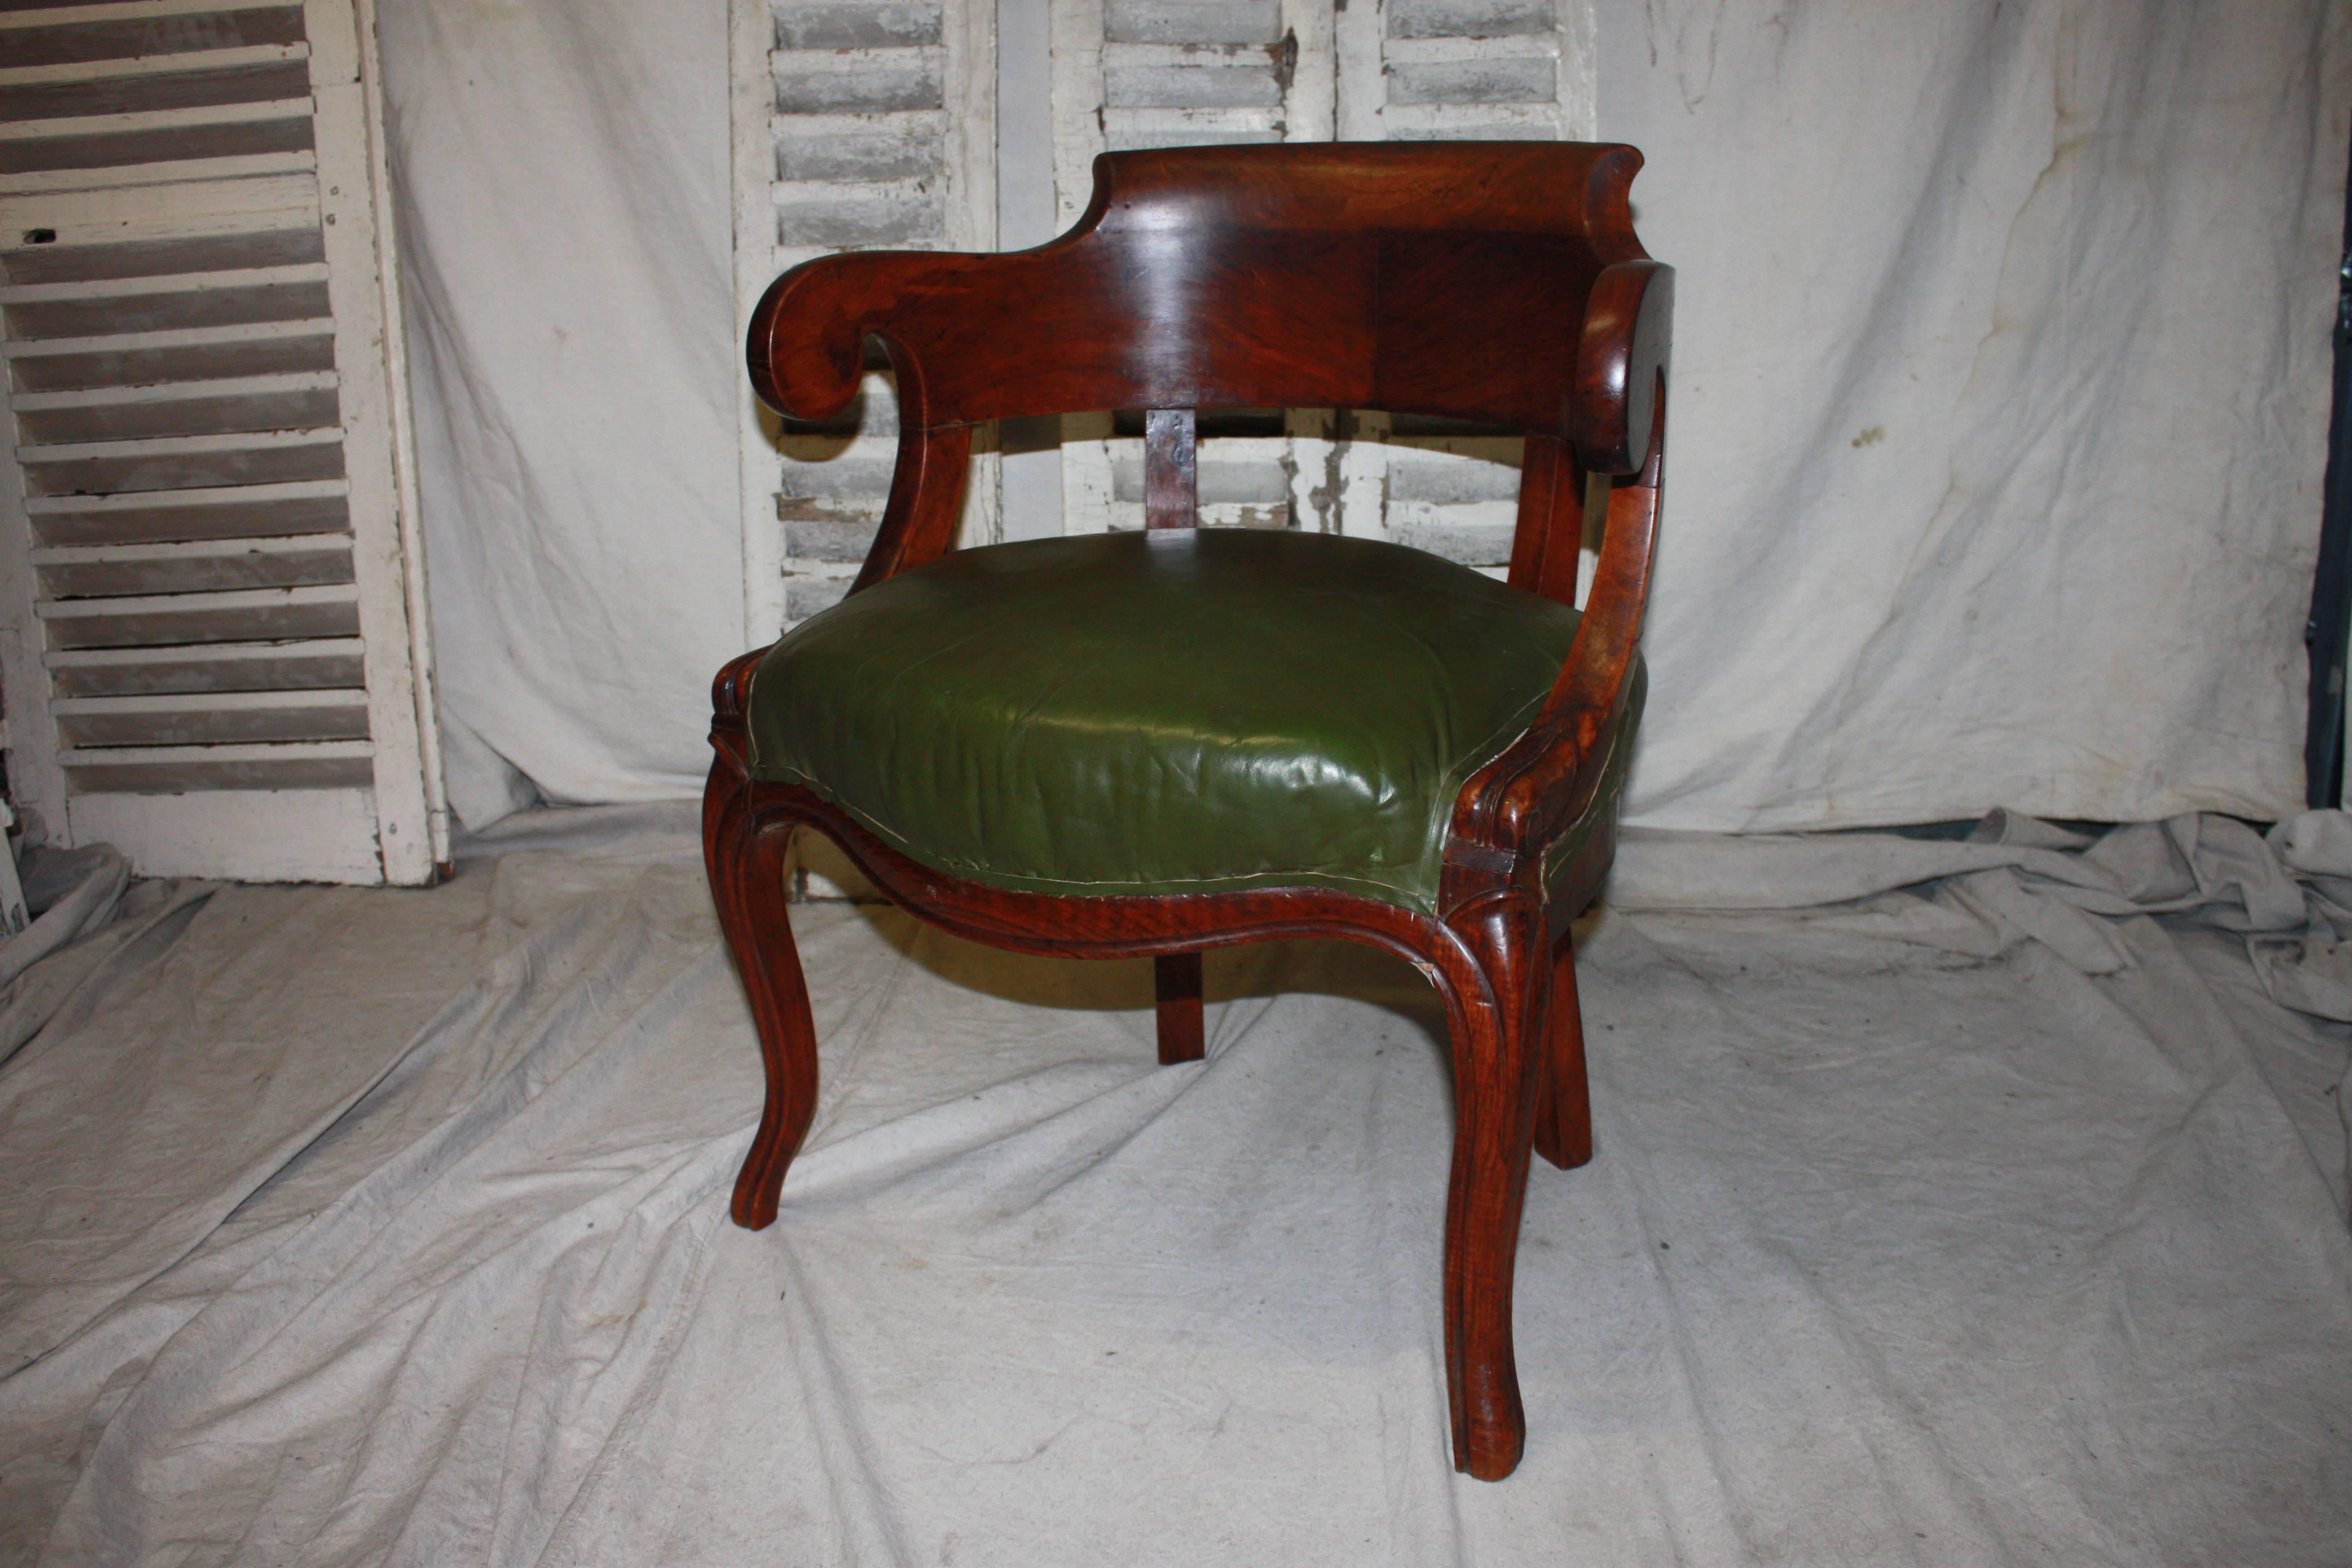 19th century French Louis-Philippe desk chair. The wood is in walnut.